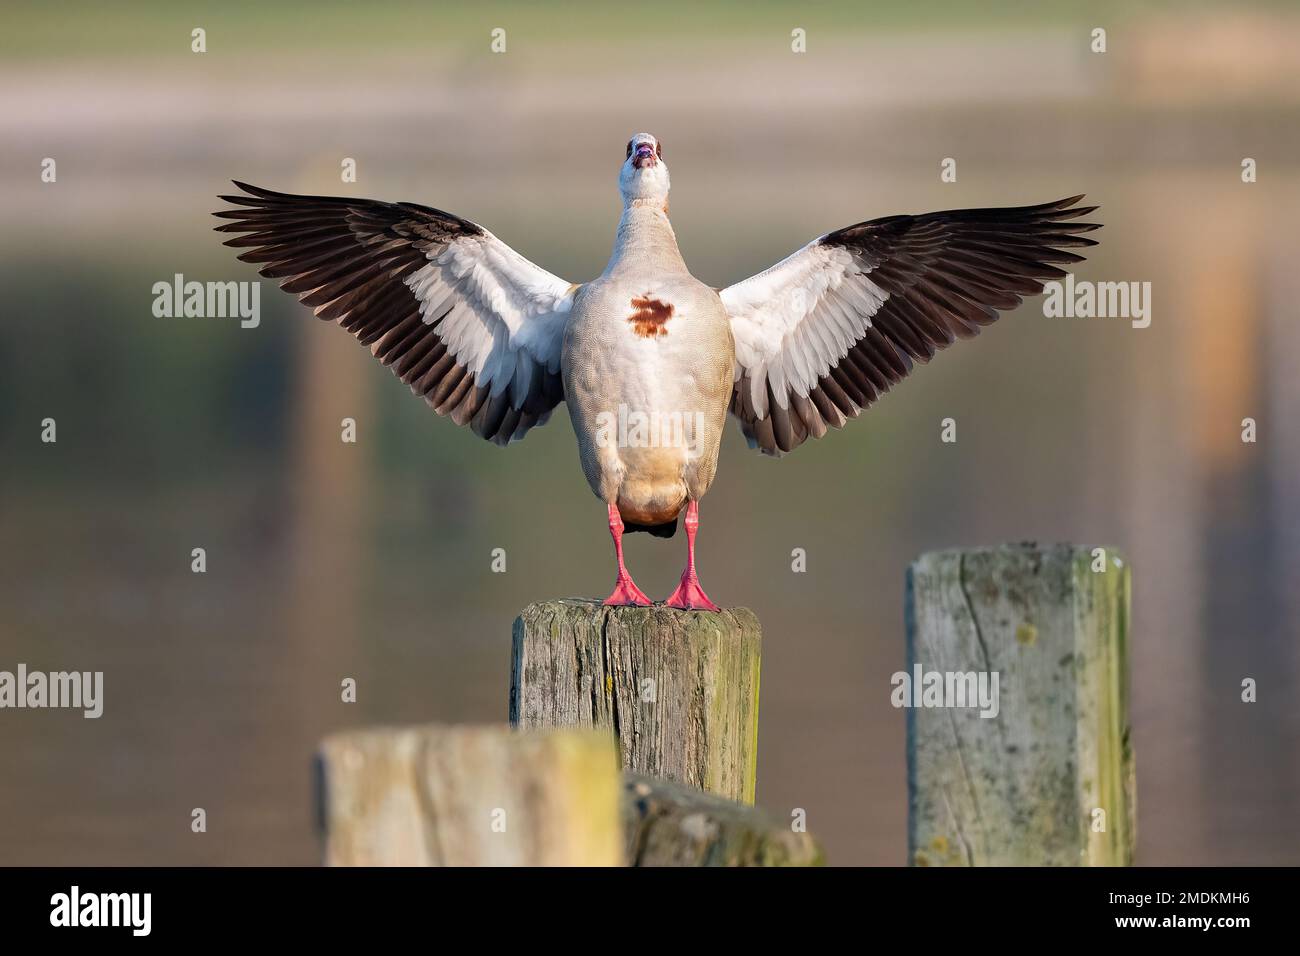 Egyptian goose (Alopochen aegyptiacus), sitting on a post in water flapping wings, Germany Stock Photo